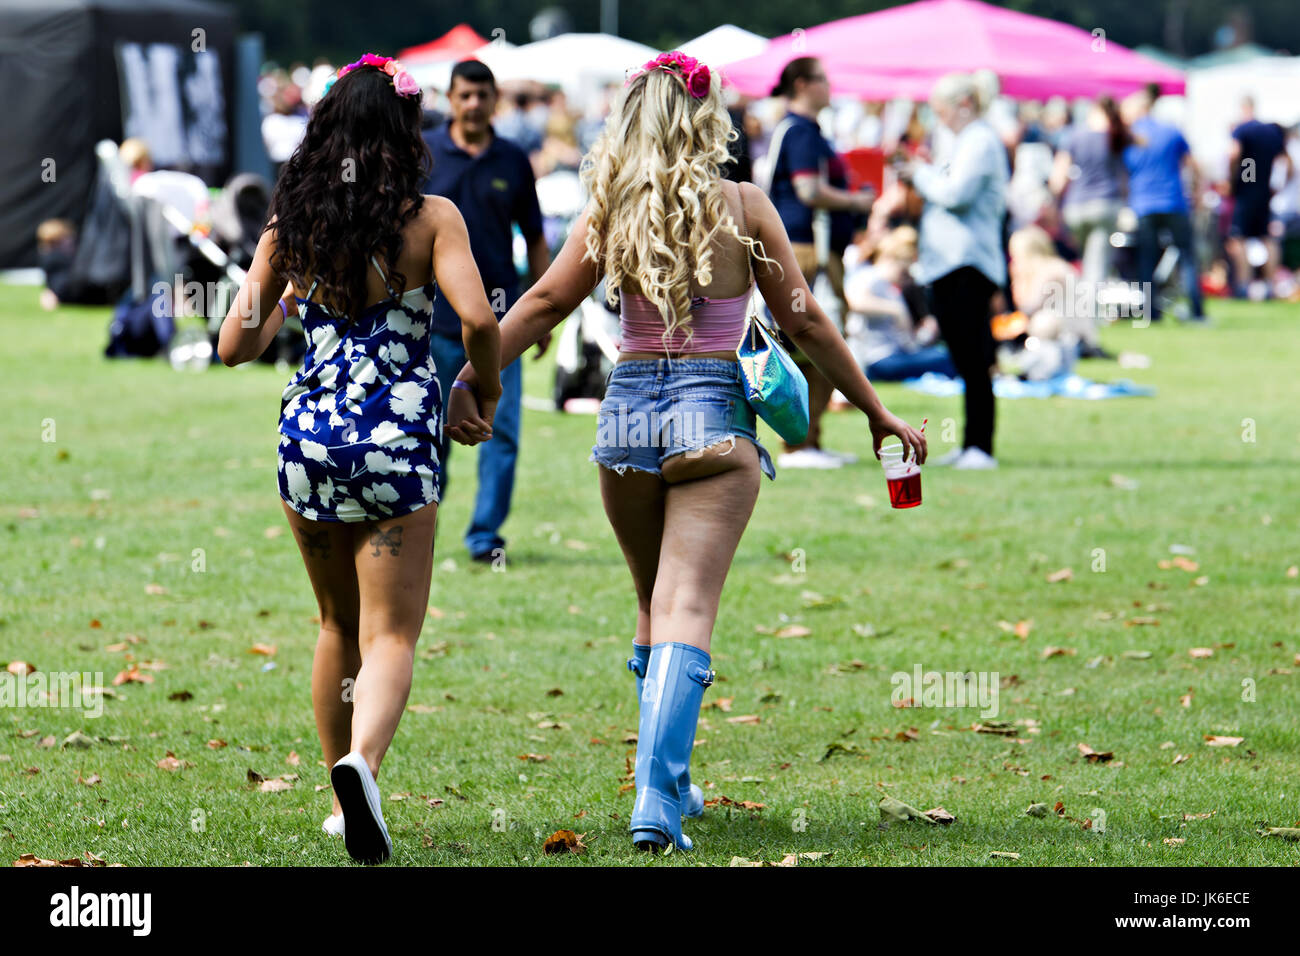 Girls arriving in wellies and cut off shorts for the Liverpool International Music Festival in Liverpool Merseyside UK. Stock Photo